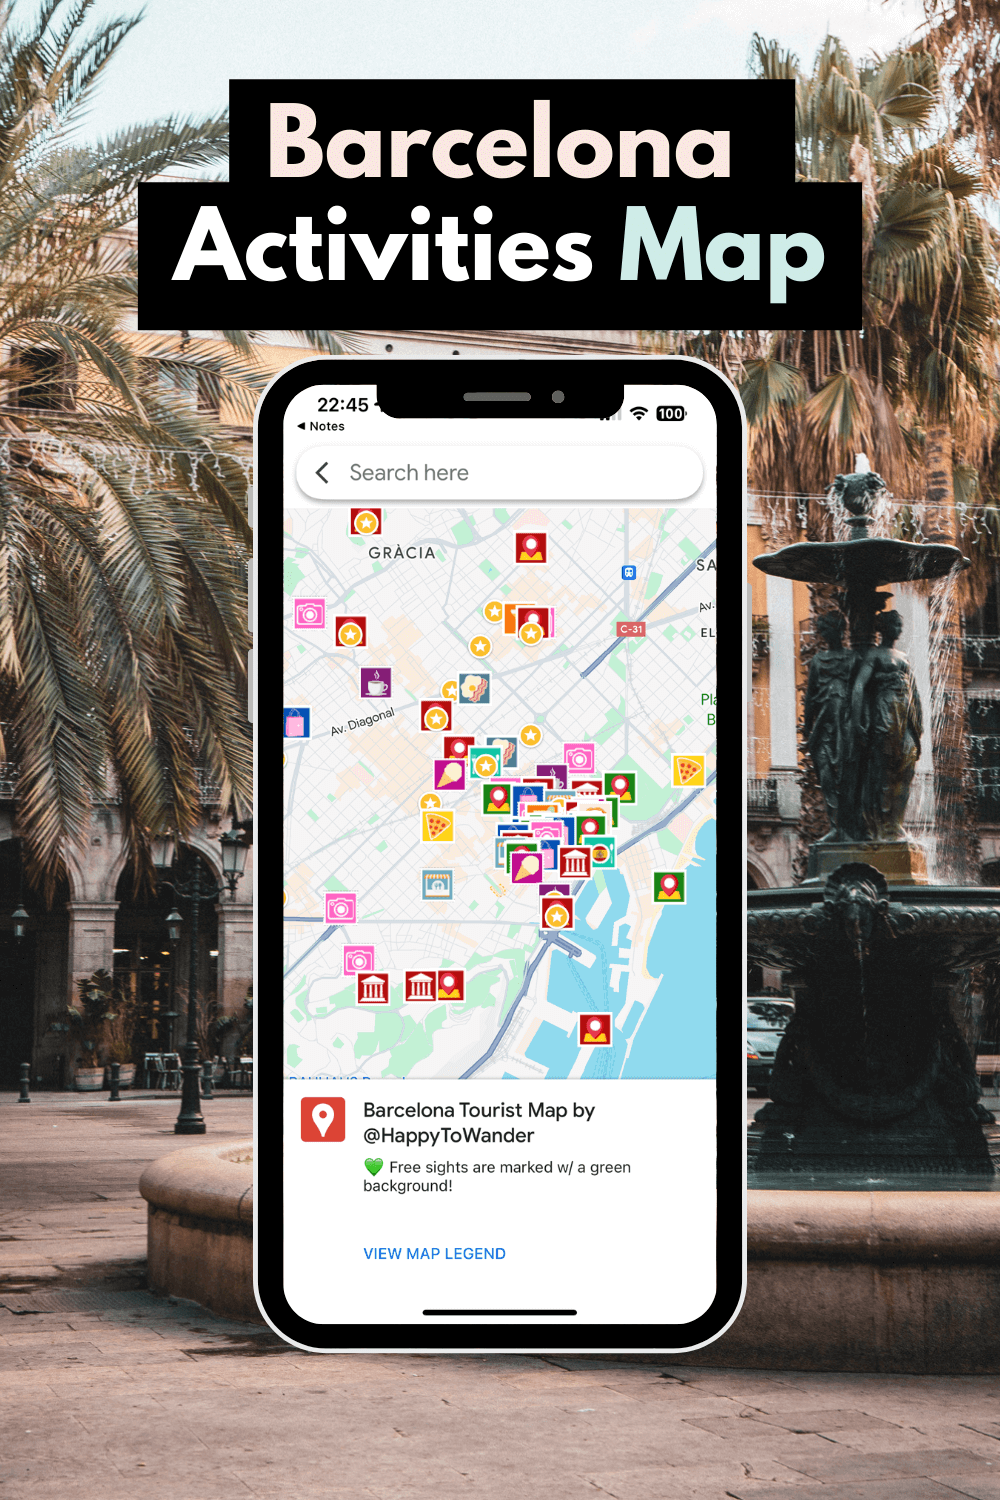 city map of barcelona with tourist attractions